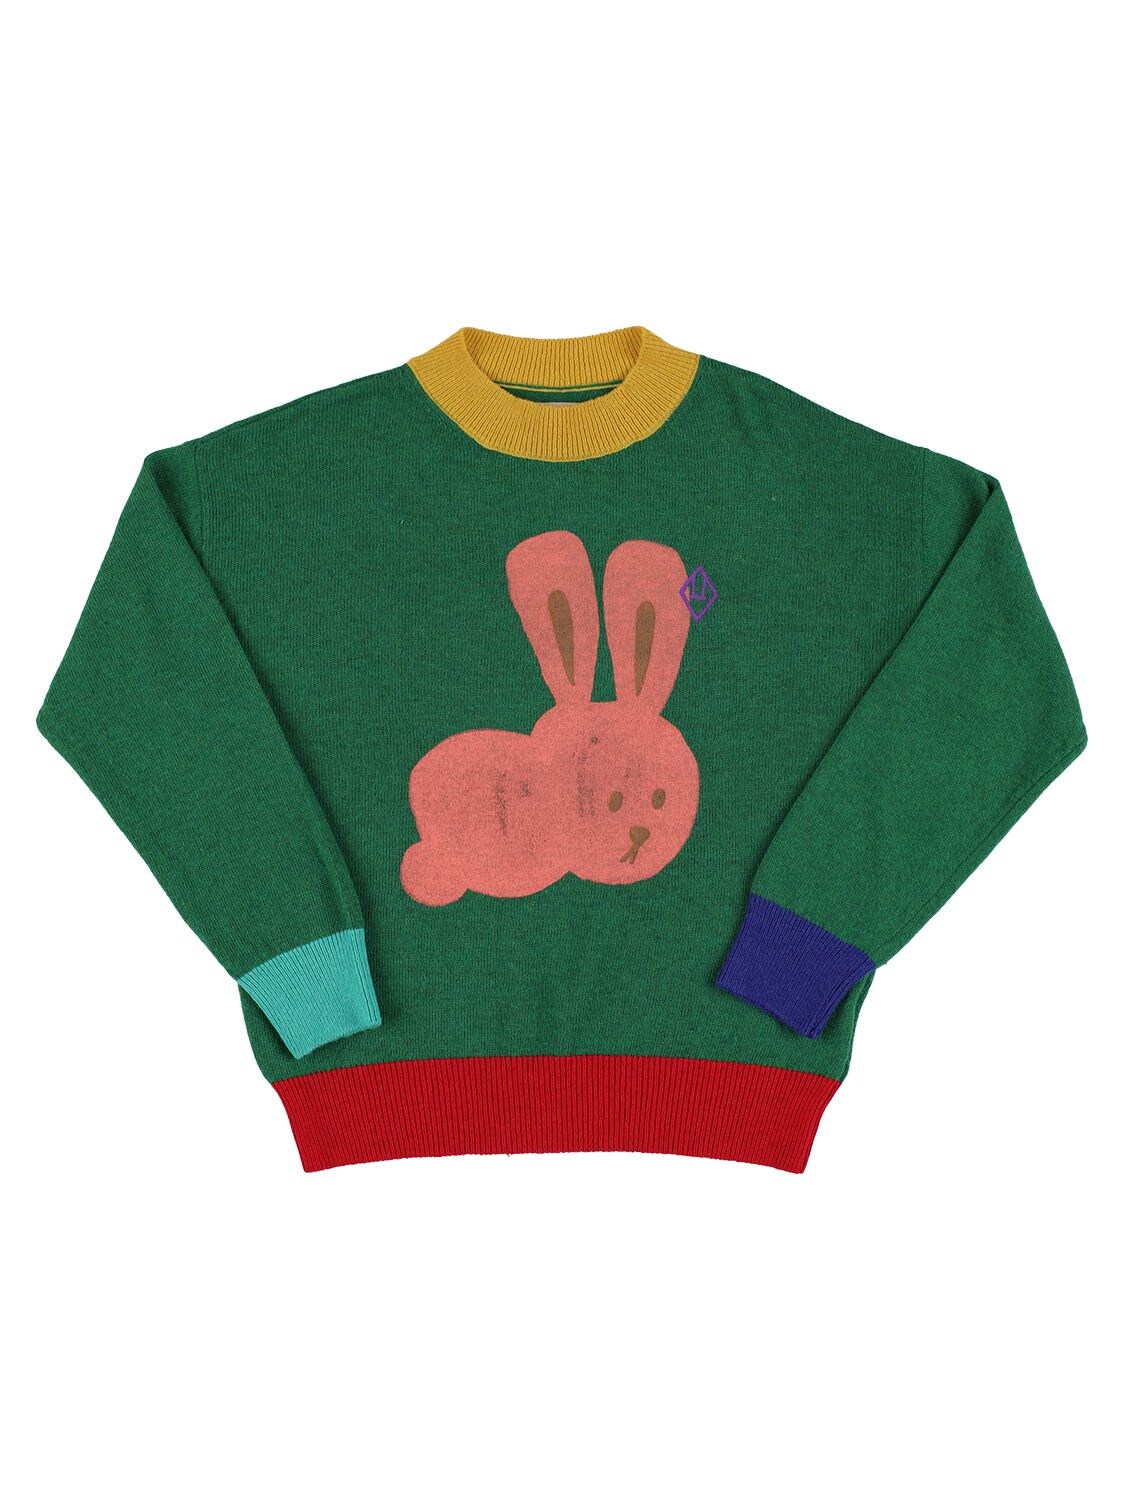 THE ANIMALS OBSERVATORY RABBIT PRINTED WOOL TRICOT KNIT SWEATER